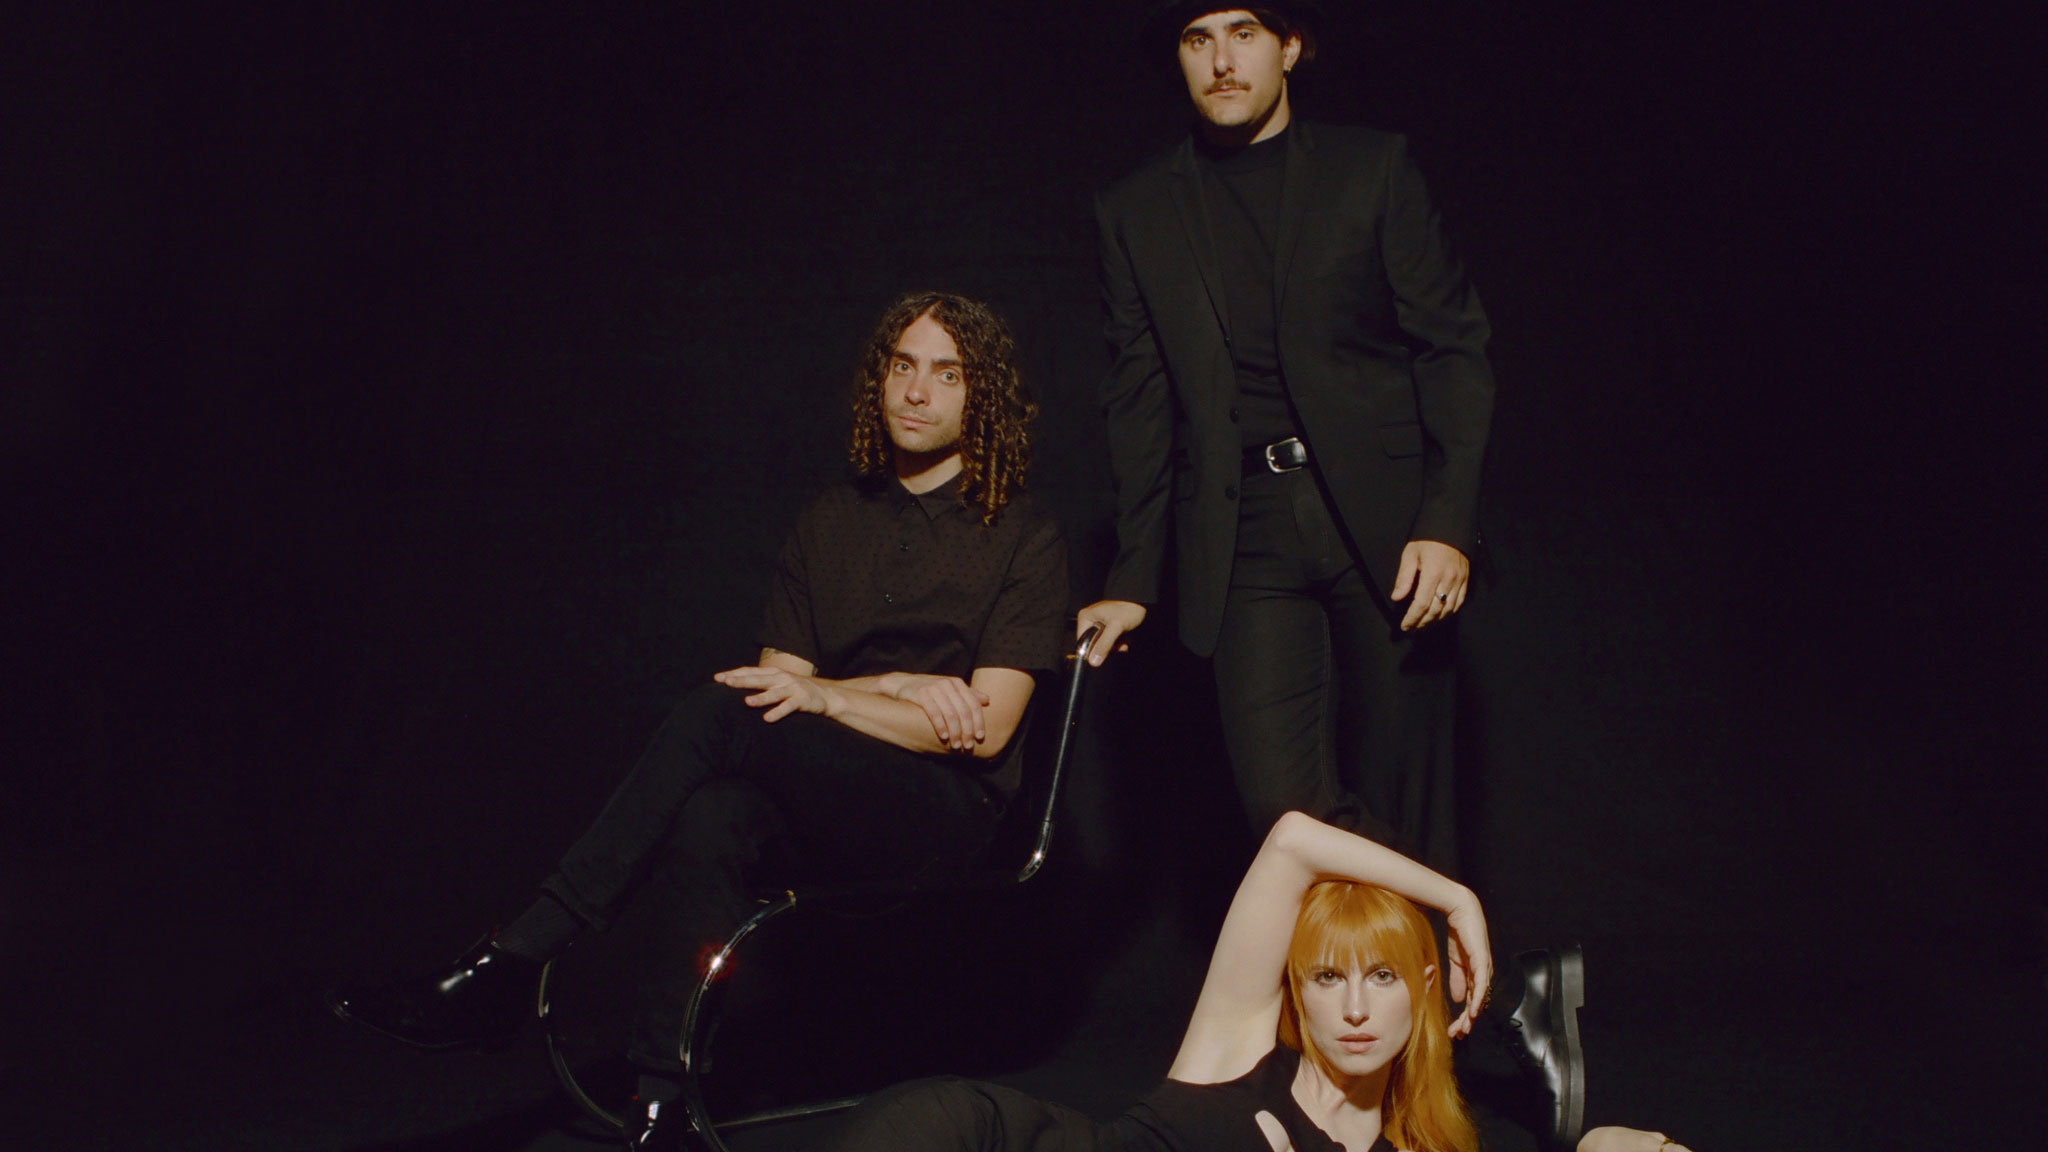 Paramore Drops Talking Heads 'Burning Down The House' Cover - Listen